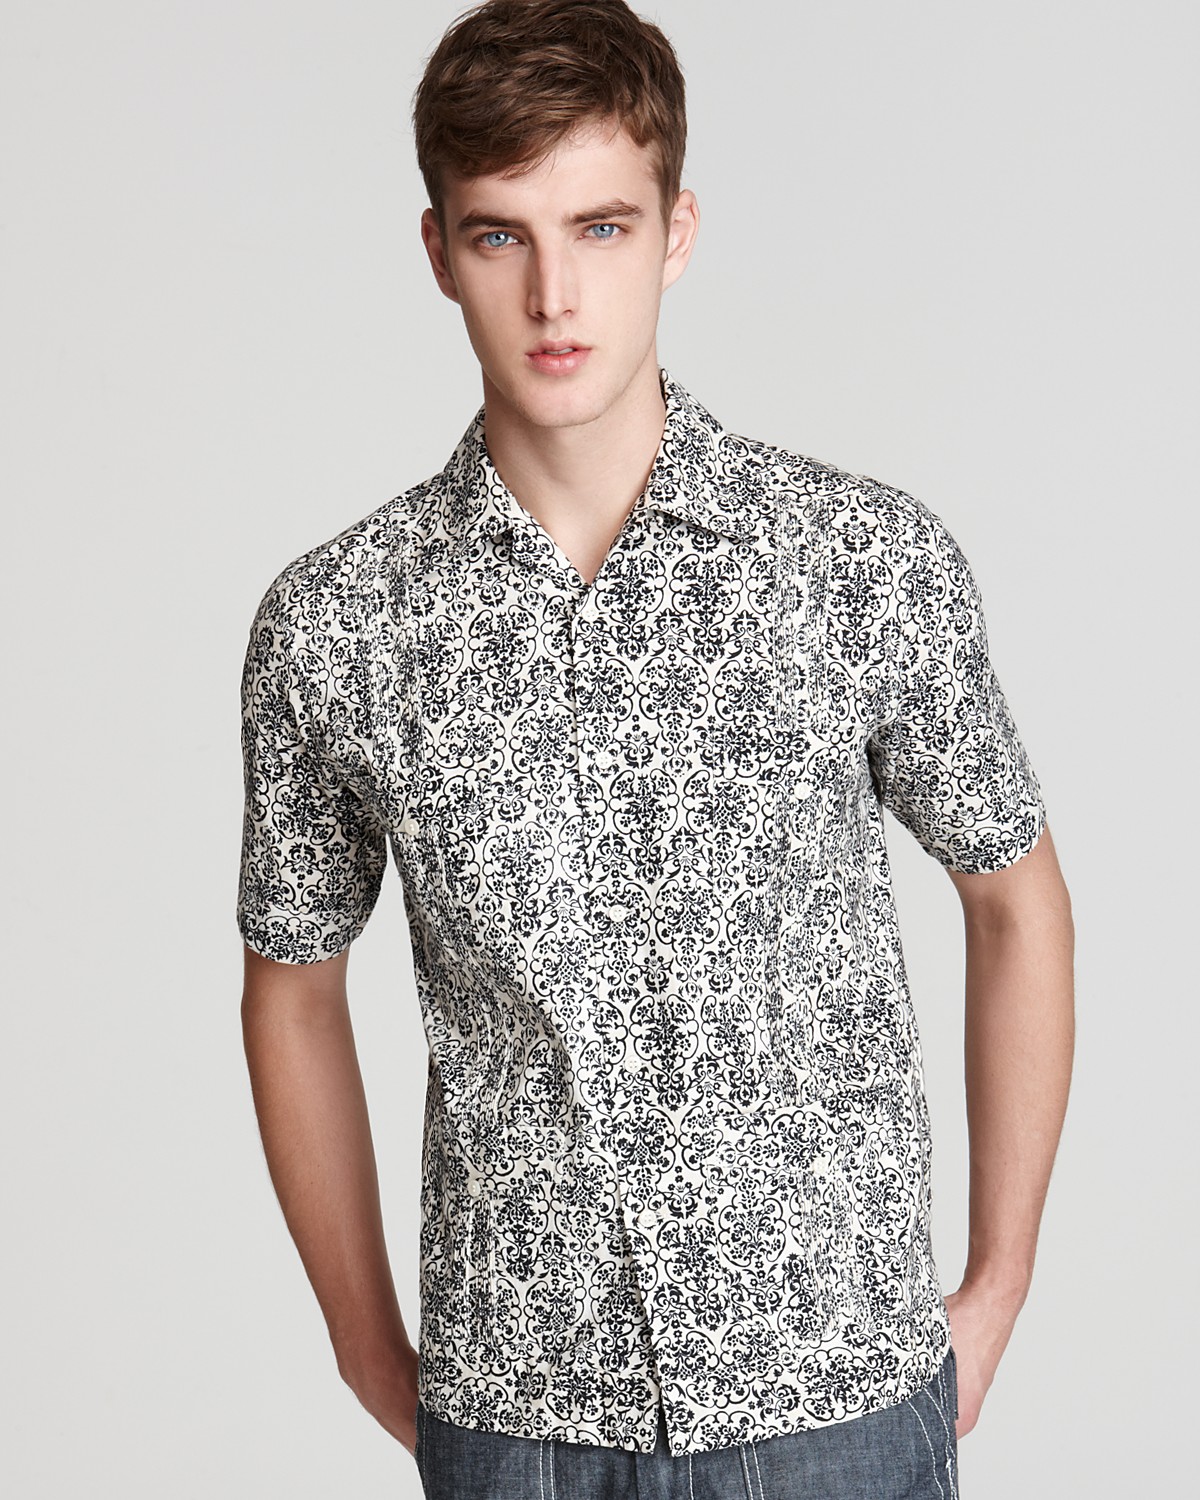 James Smith Sports Summer Styles for Bloomingdale's